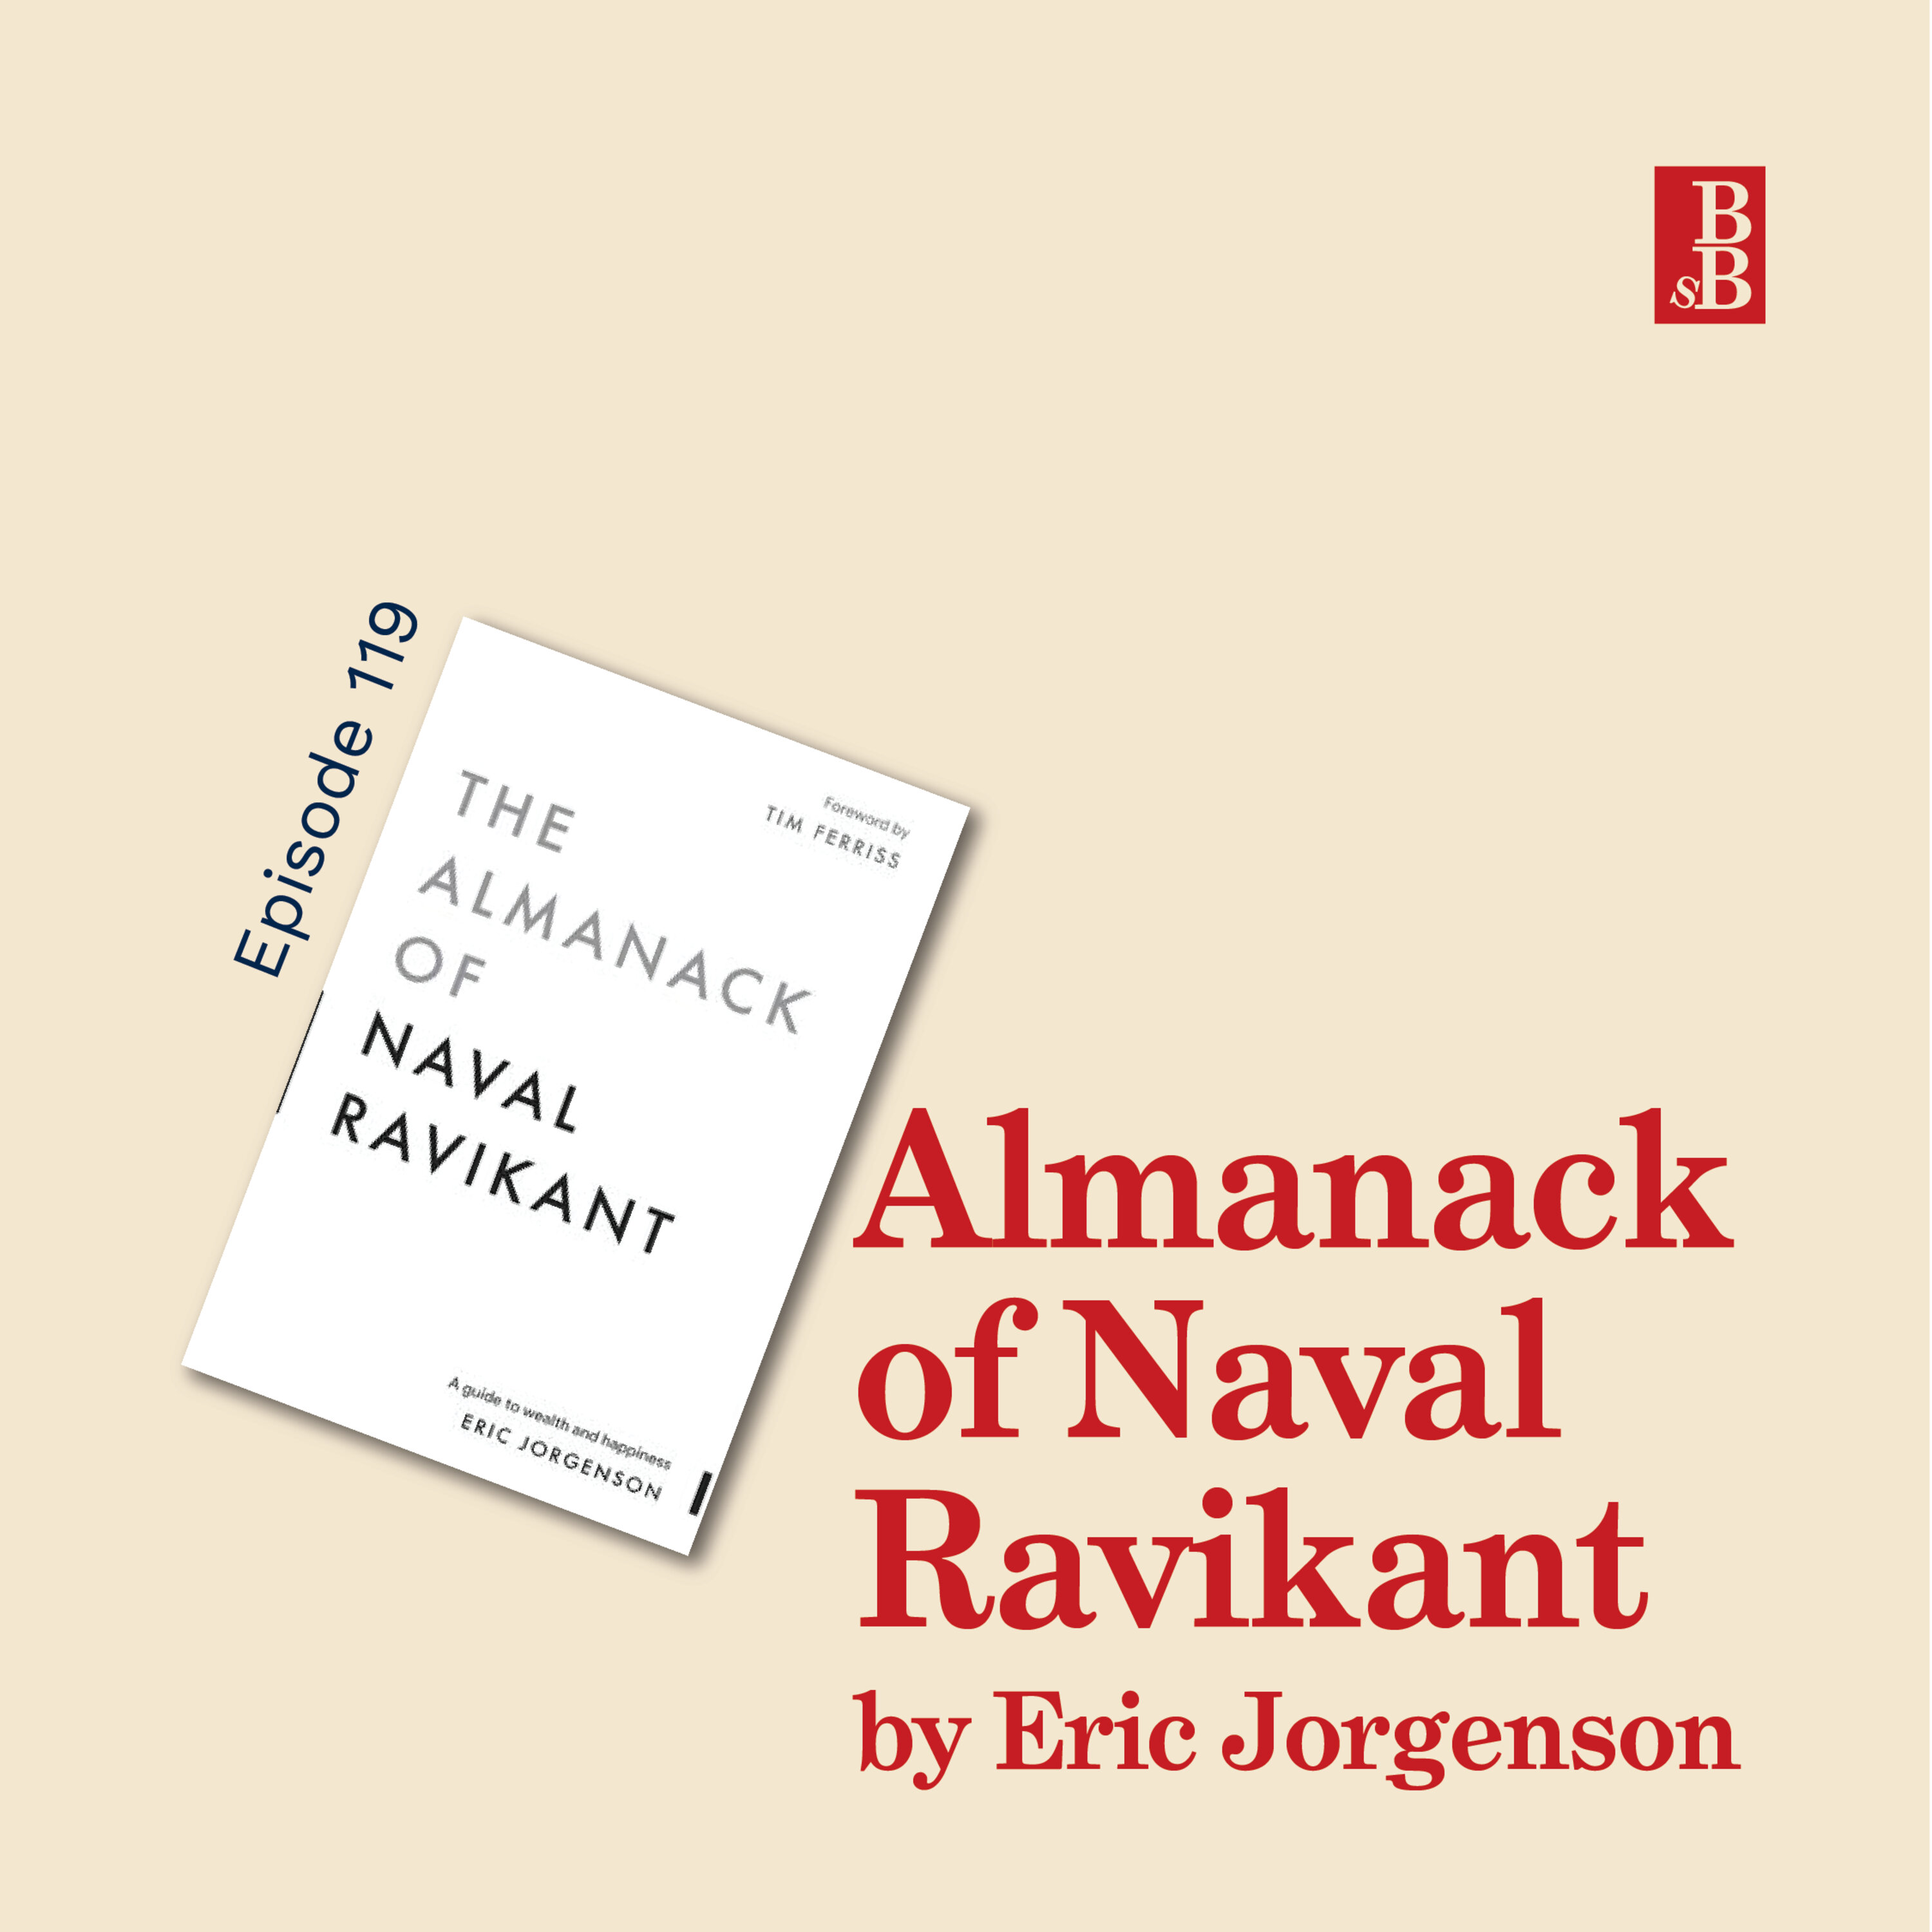 Almanack of Naval Ravikant by Eric Jorgenson: the principles behind wealth and happiness